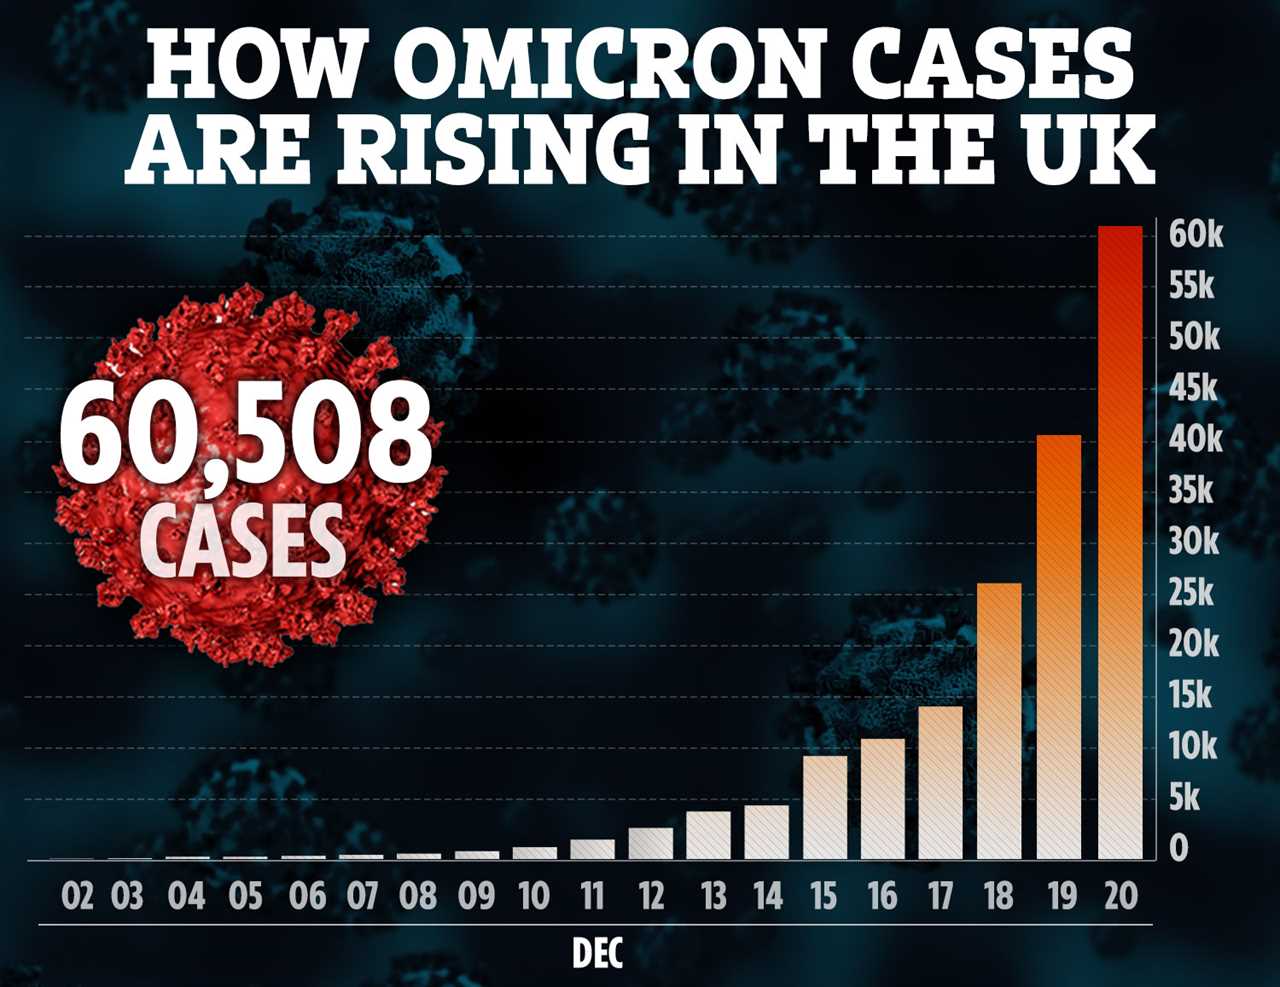 Boris Johnson tells Brits Christmas is ON – but New Year’s Eve looks doomed as Omicron cases soar